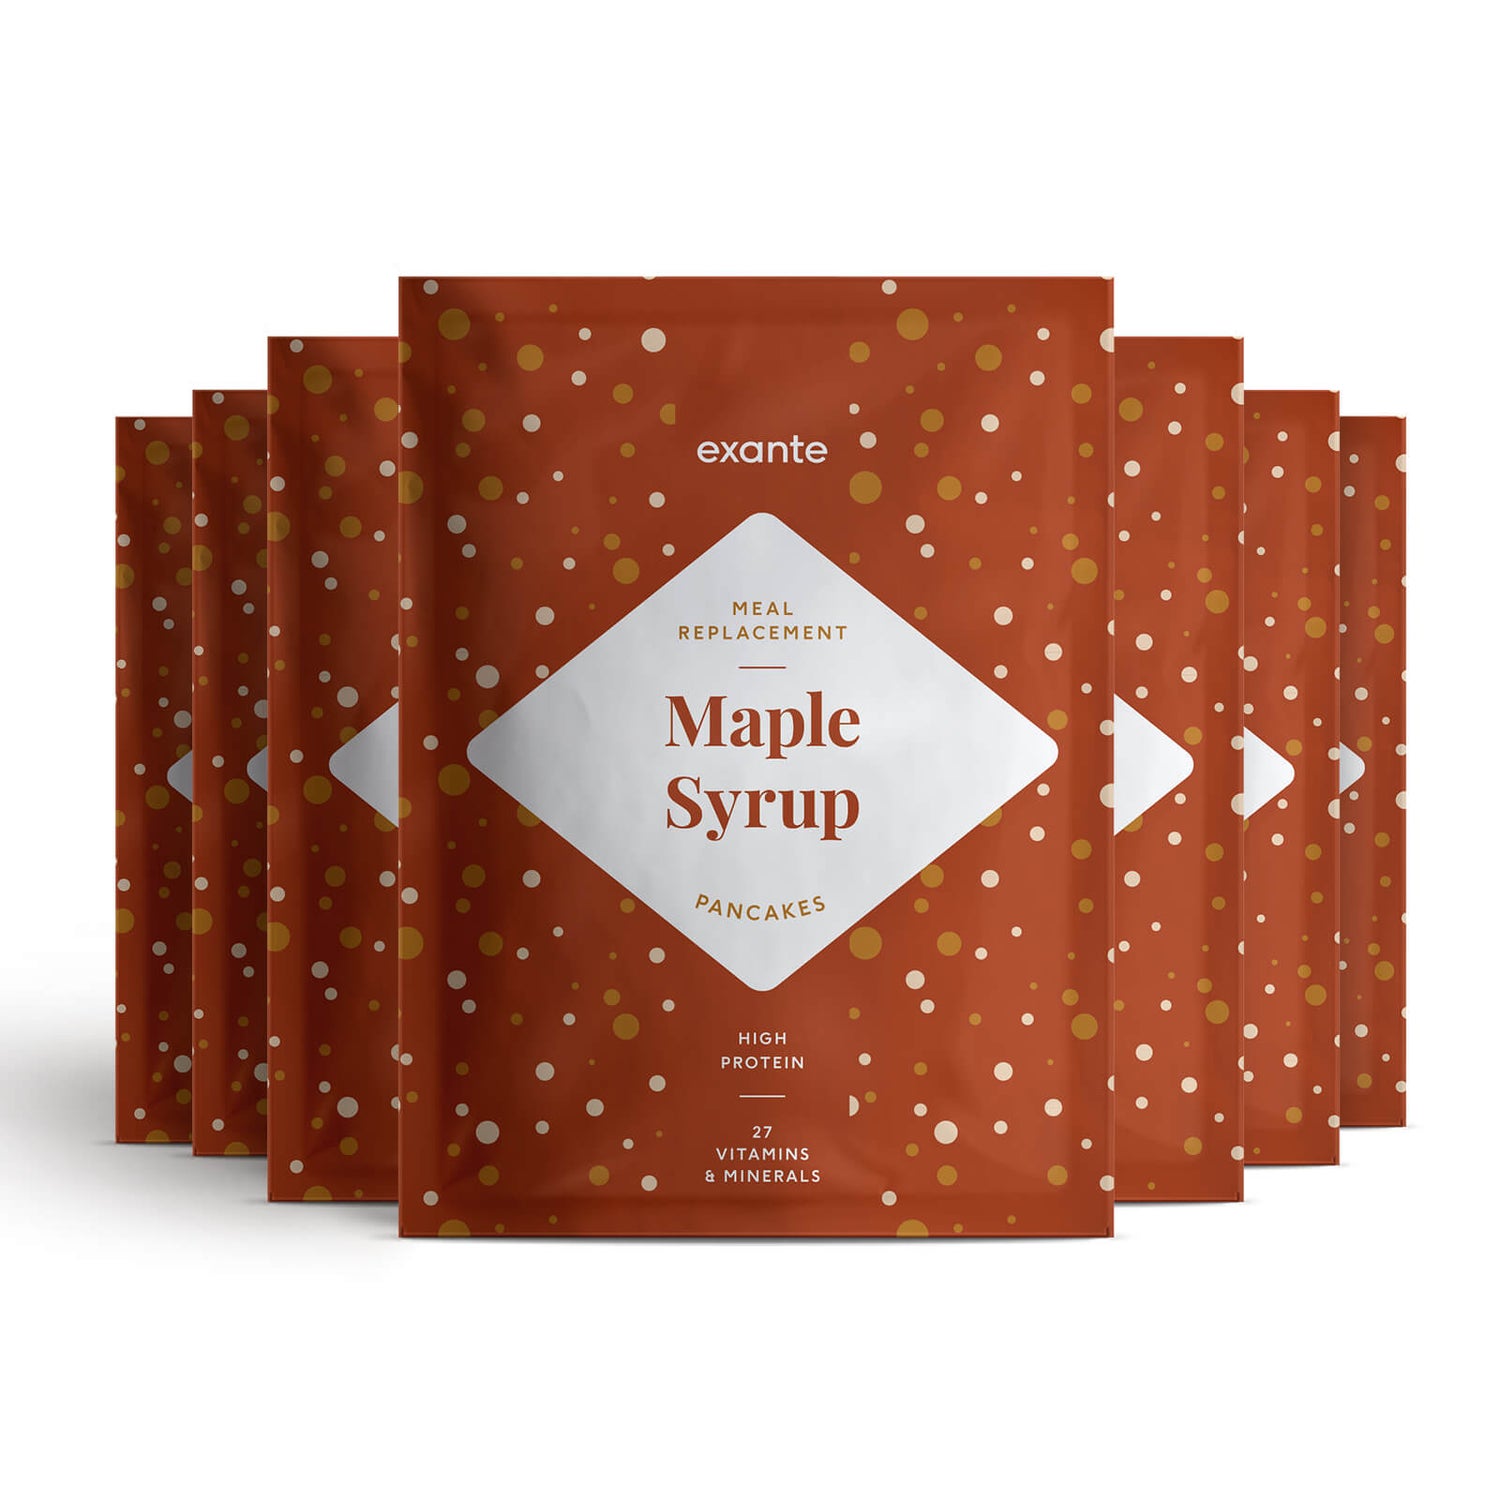 Meal Replacement Box of 7 Maple Syrup Pancakes